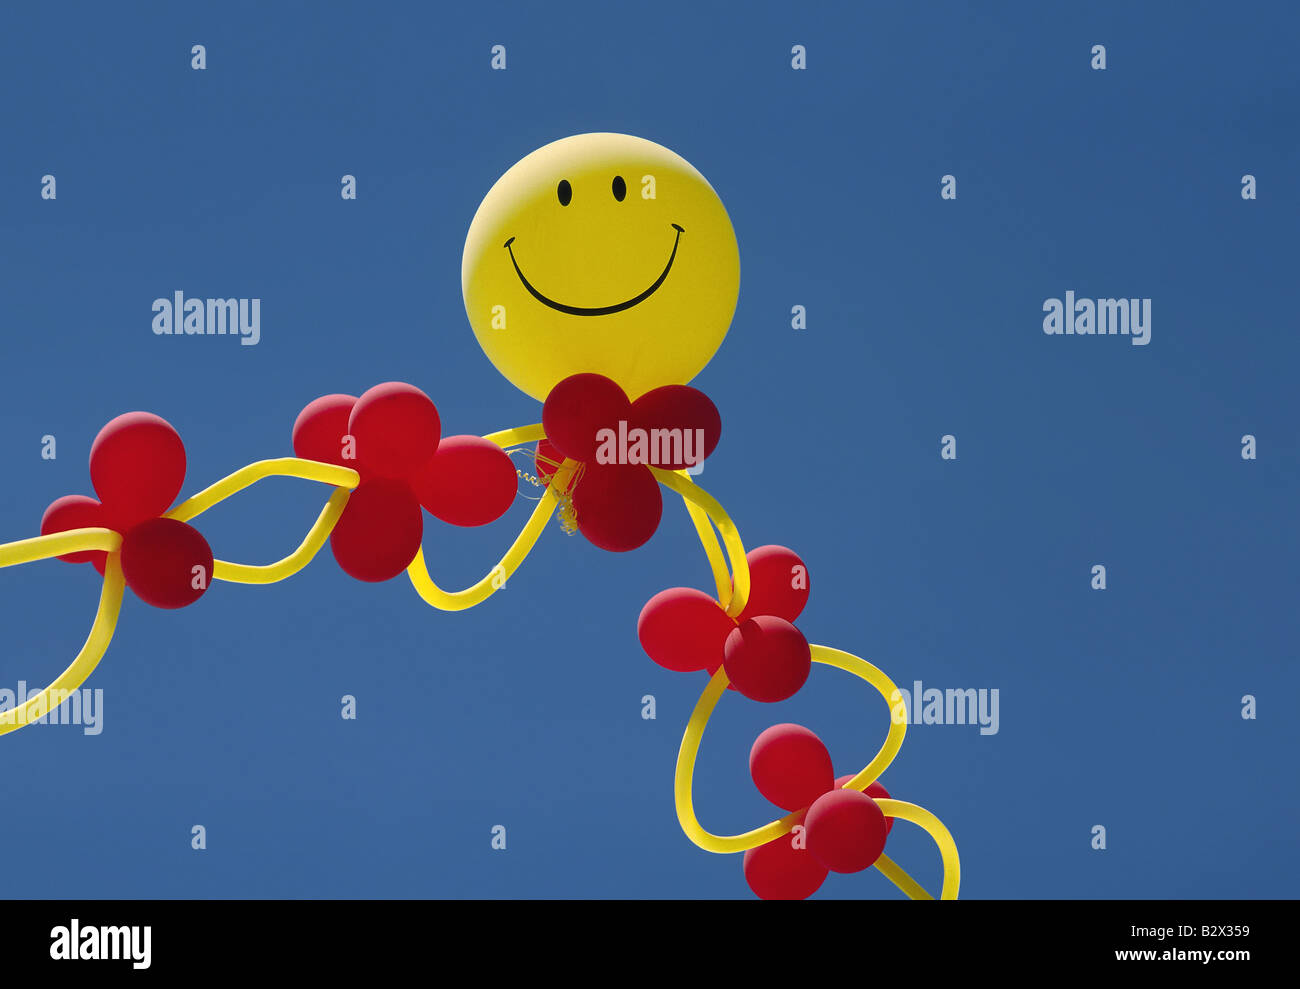 Colorful balloon arrangement topped with yellow Smiley Face balloon Stock Photo